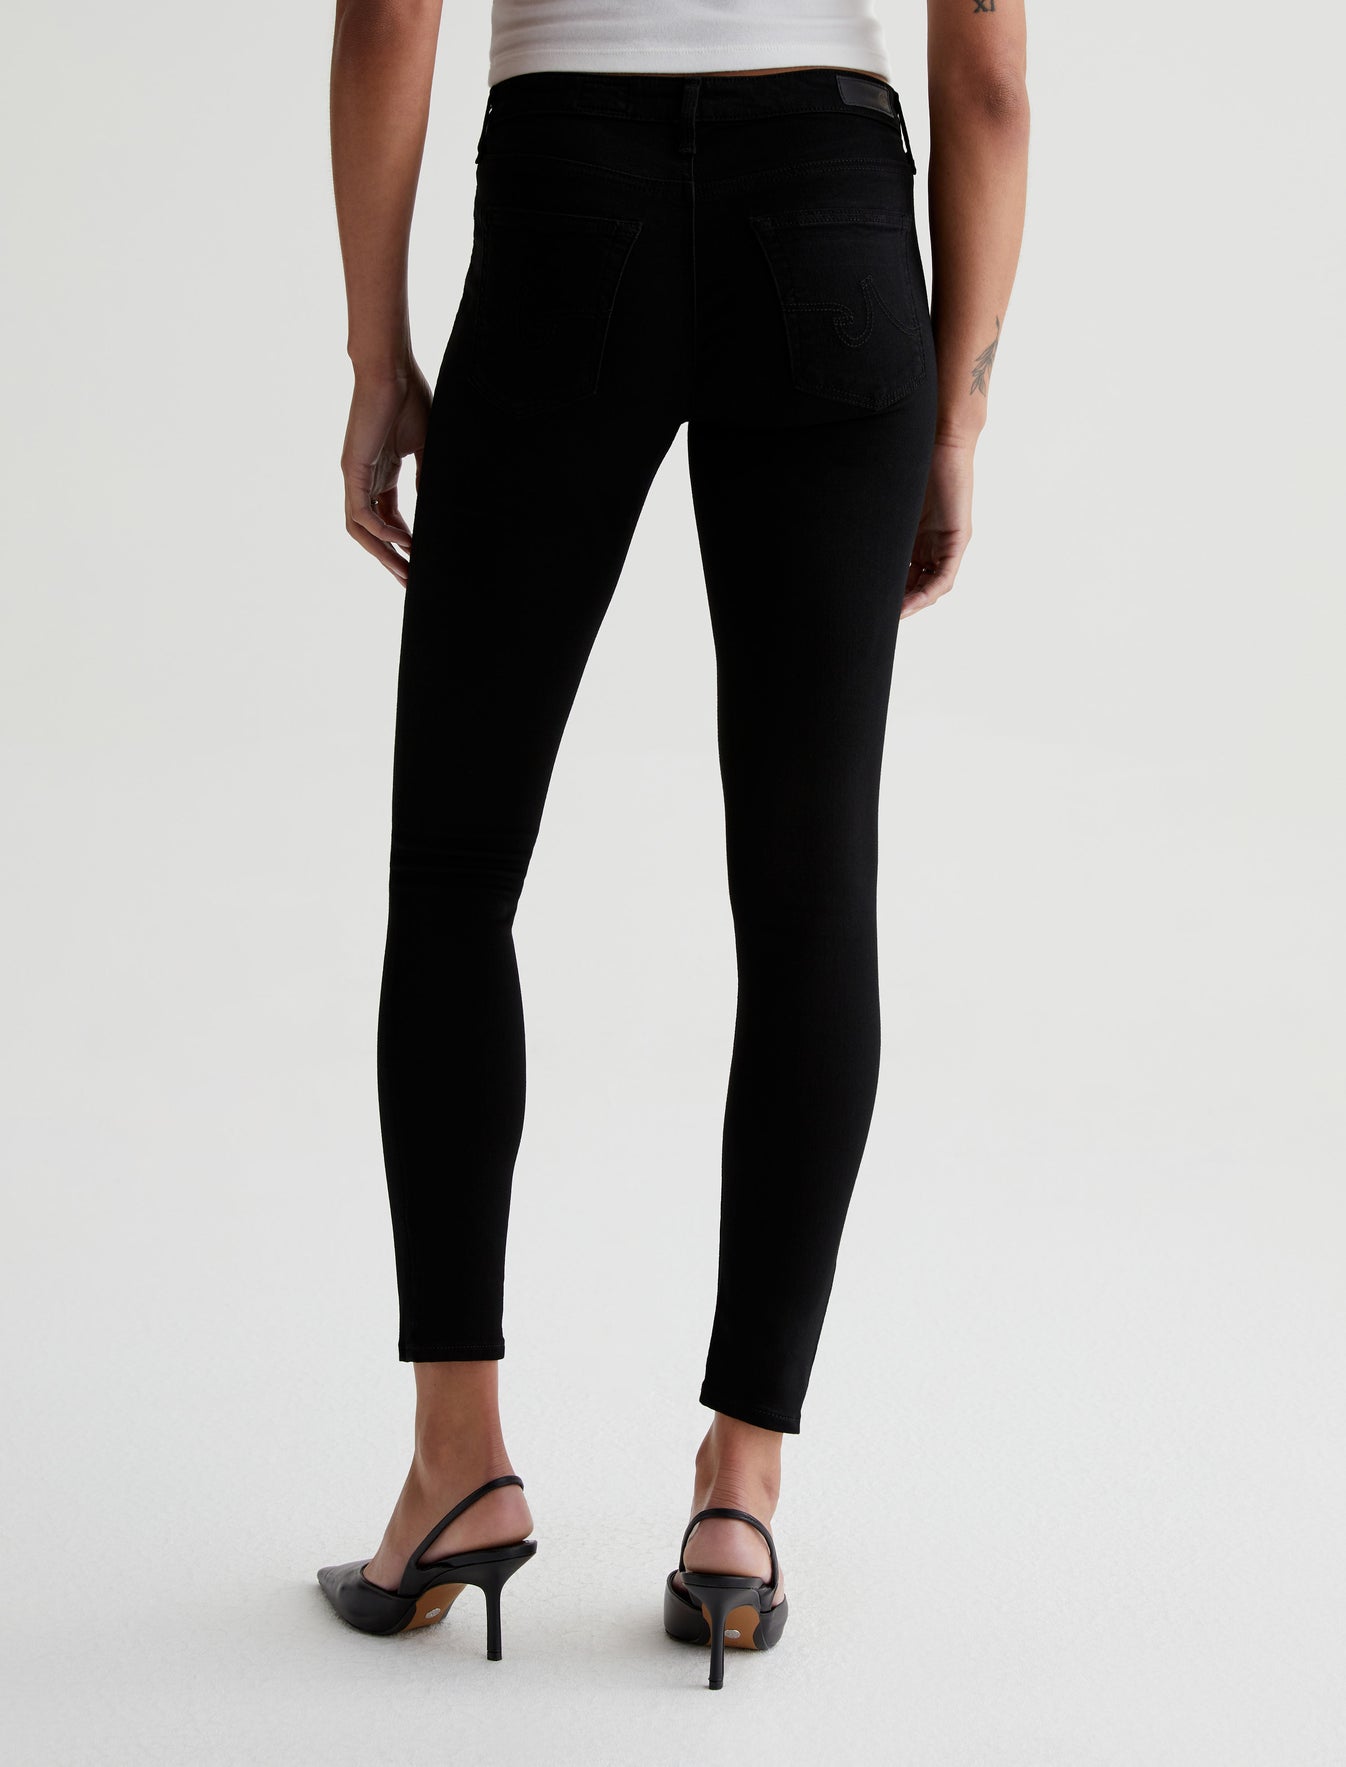 Womens Legging Ankle Super Black at AG Jeans Official Store